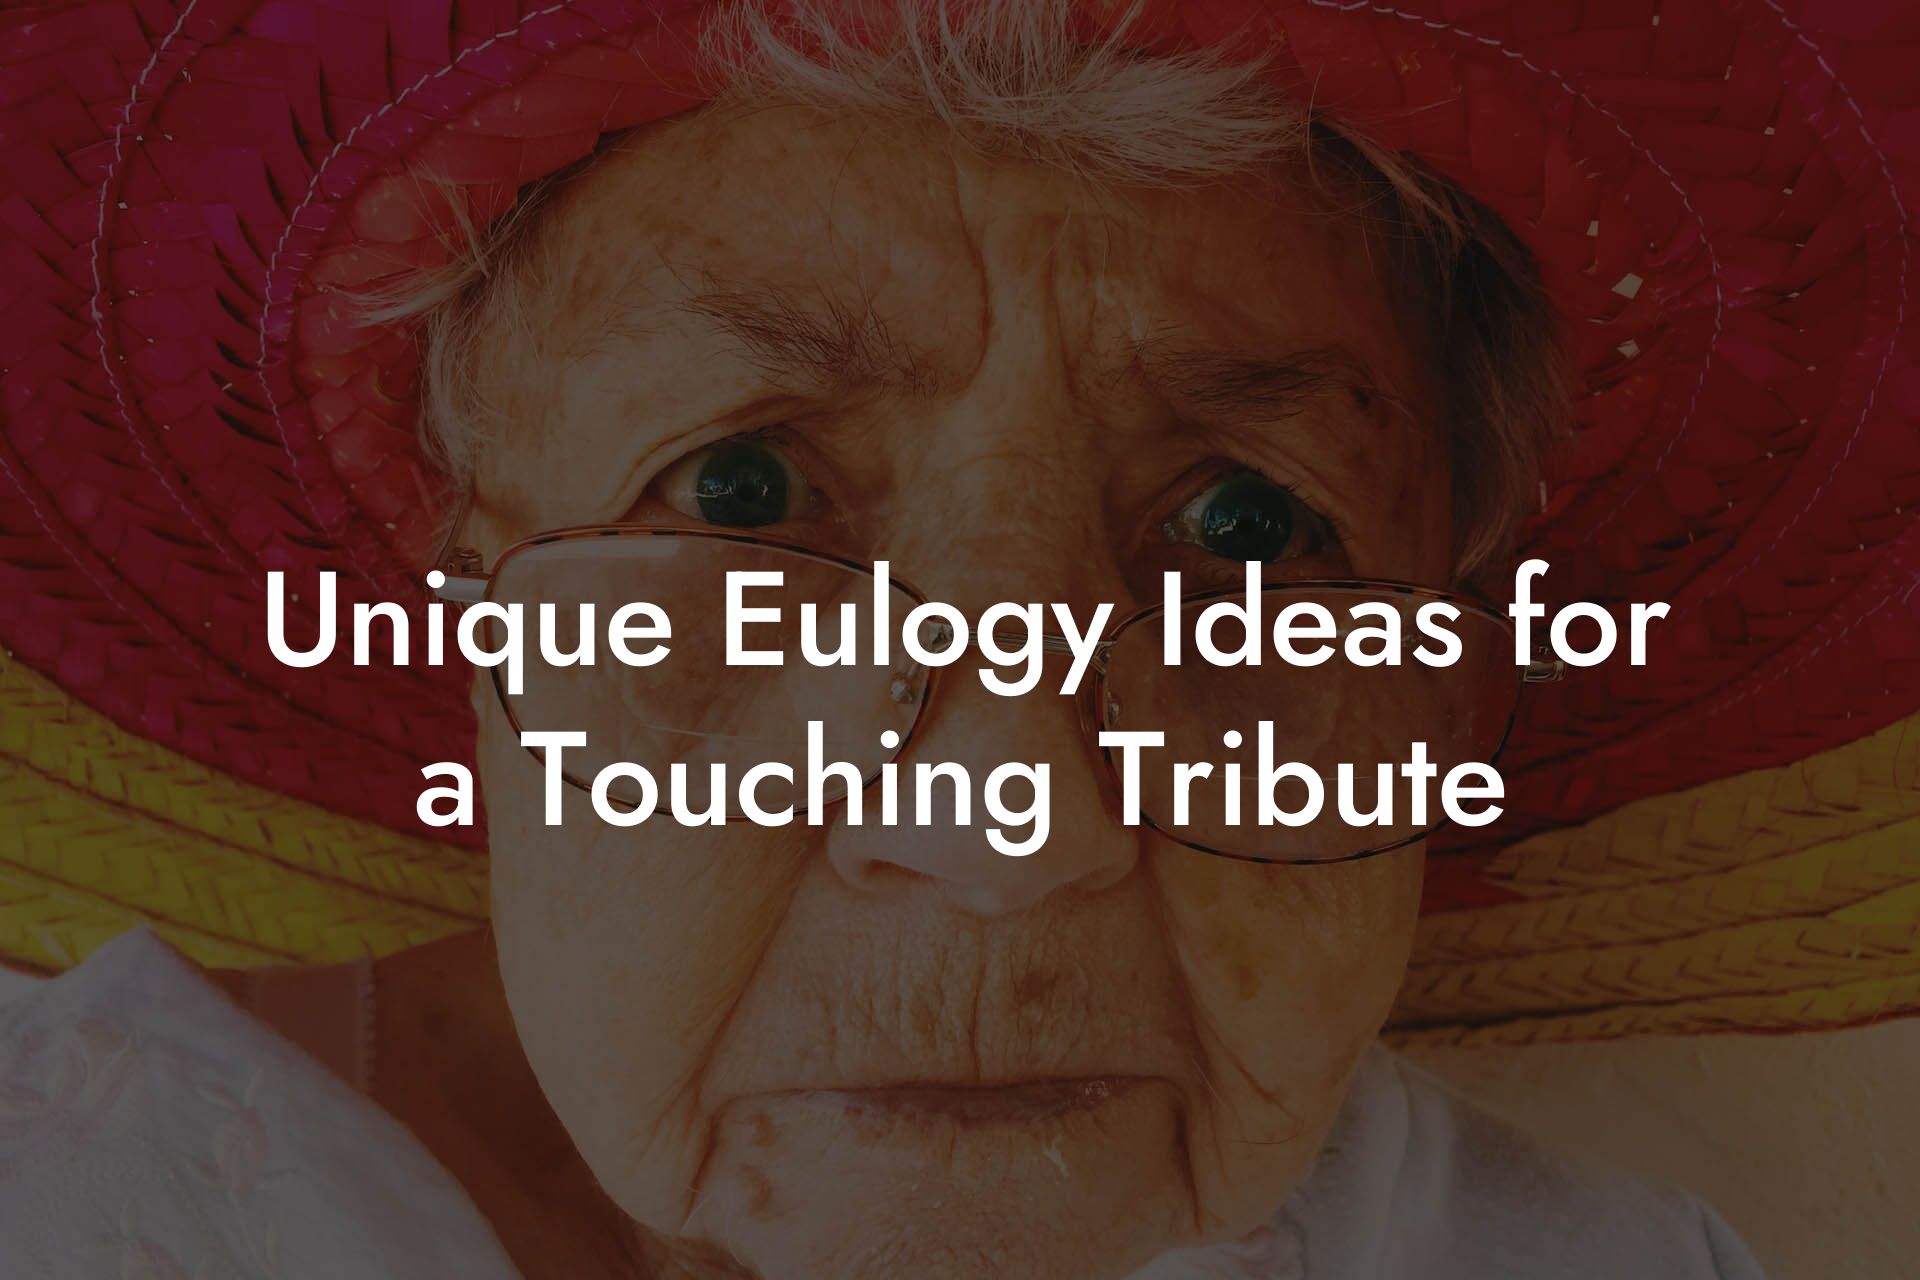 Unique Eulogy Ideas for a Touching Tribute